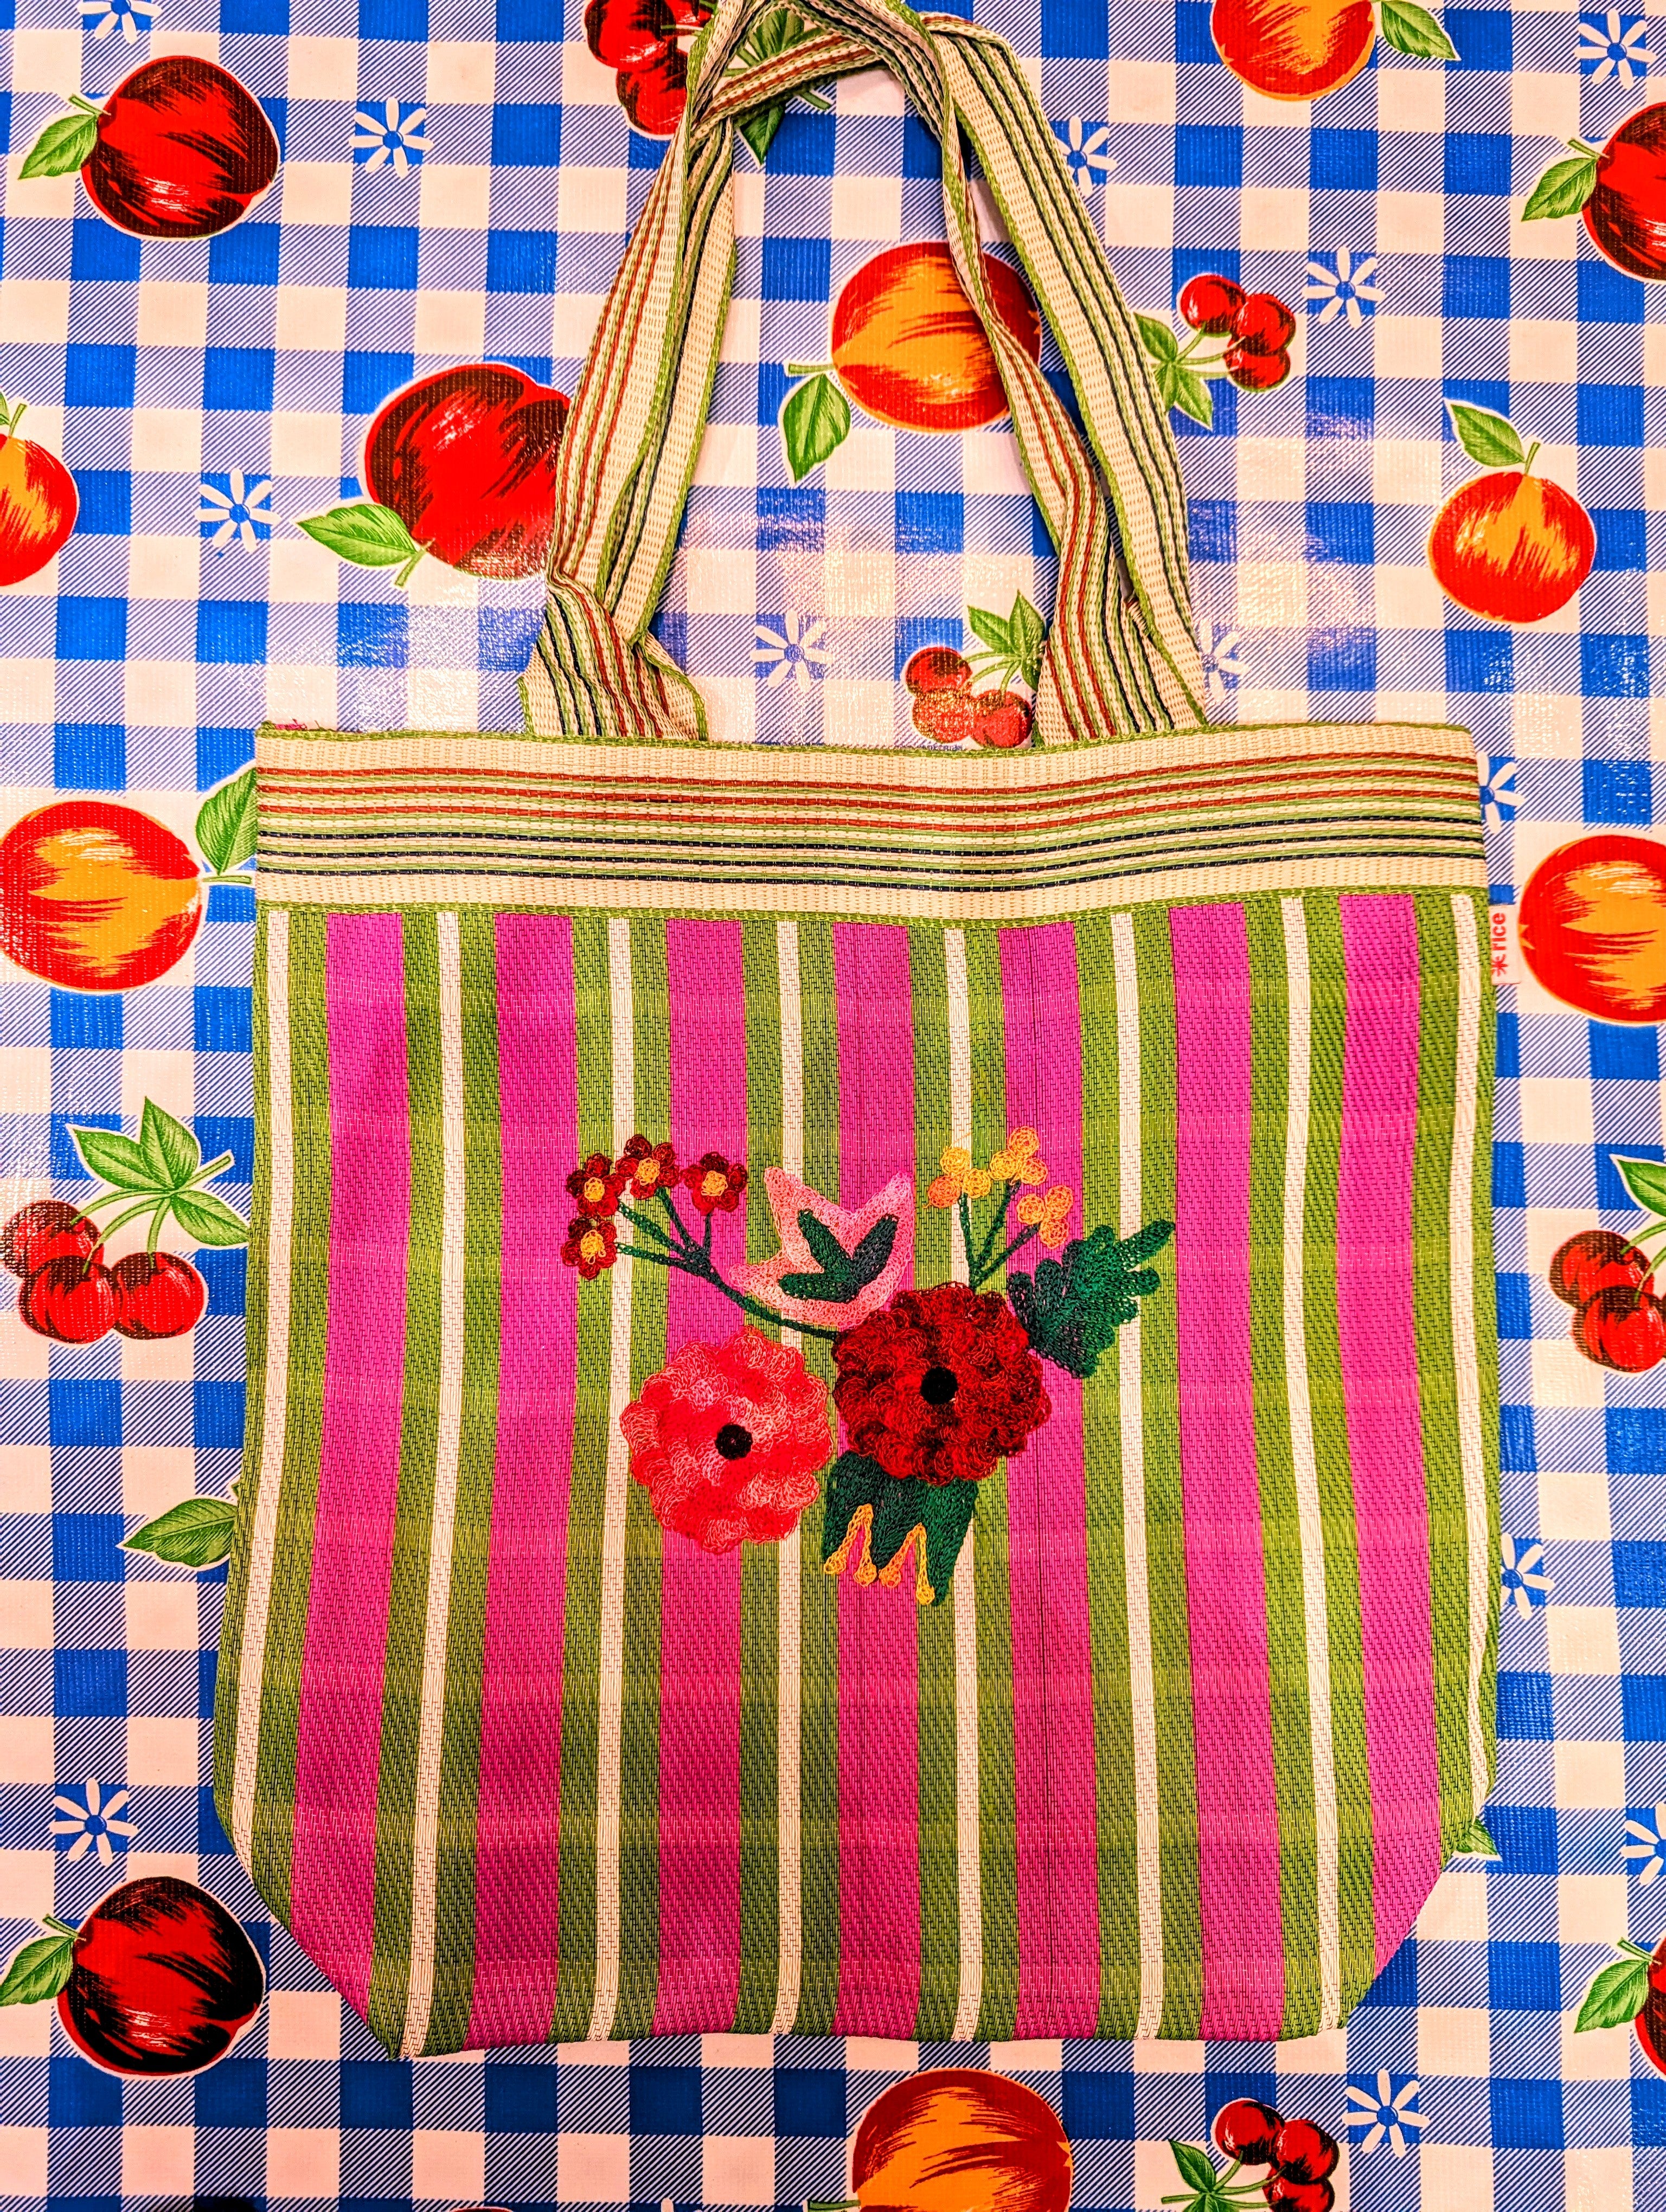 Embroidered recycled shopper